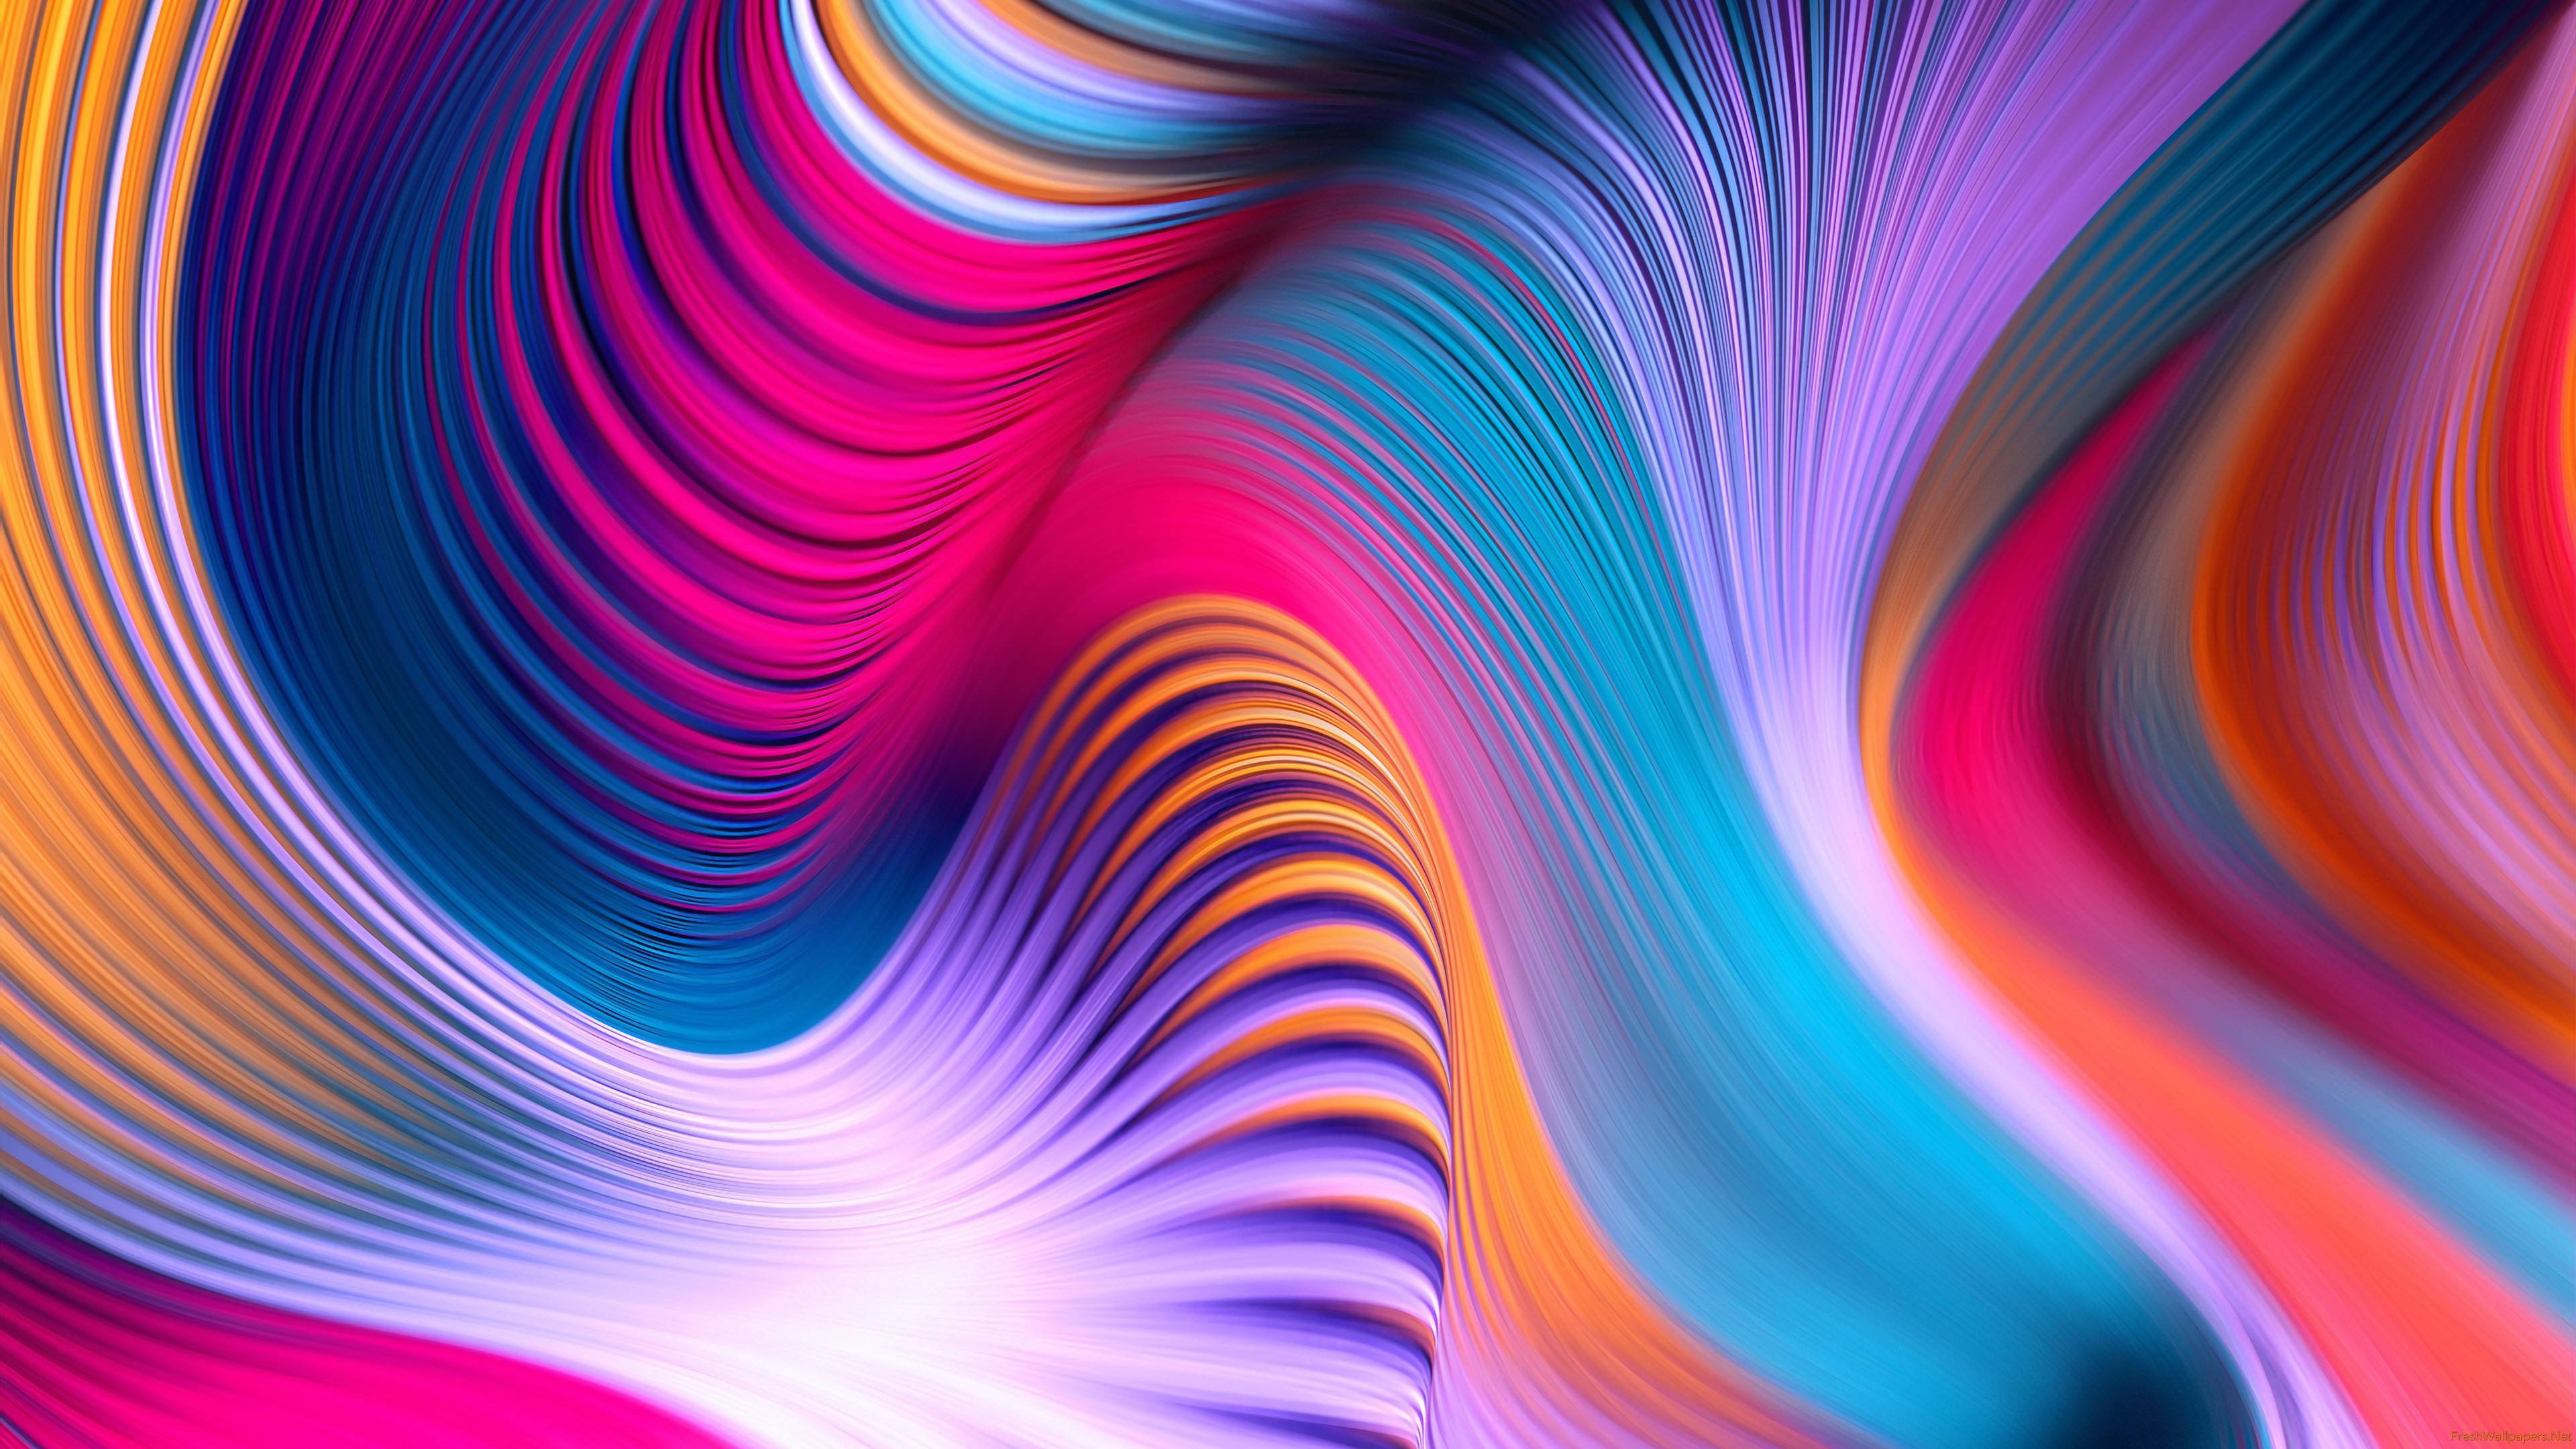 Colorful 4K Phone Wallpapers